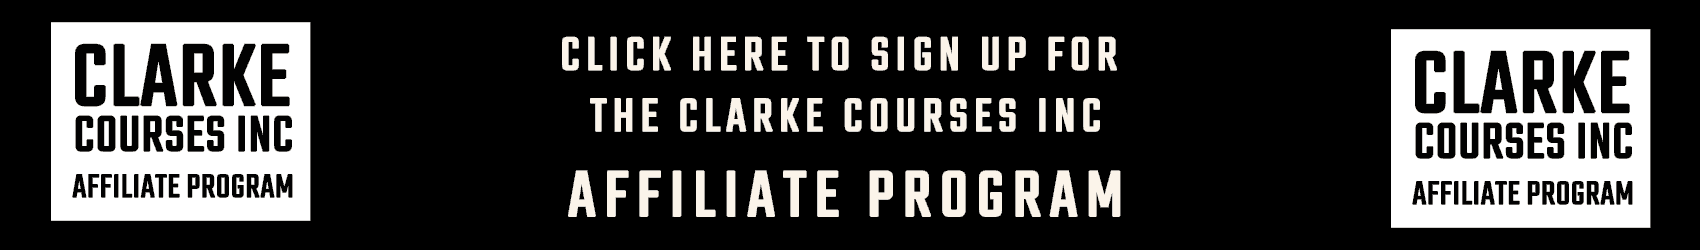 Click here to apply to enroll in the Clarke Courses Inc Affiliate Program to start earning money online today.